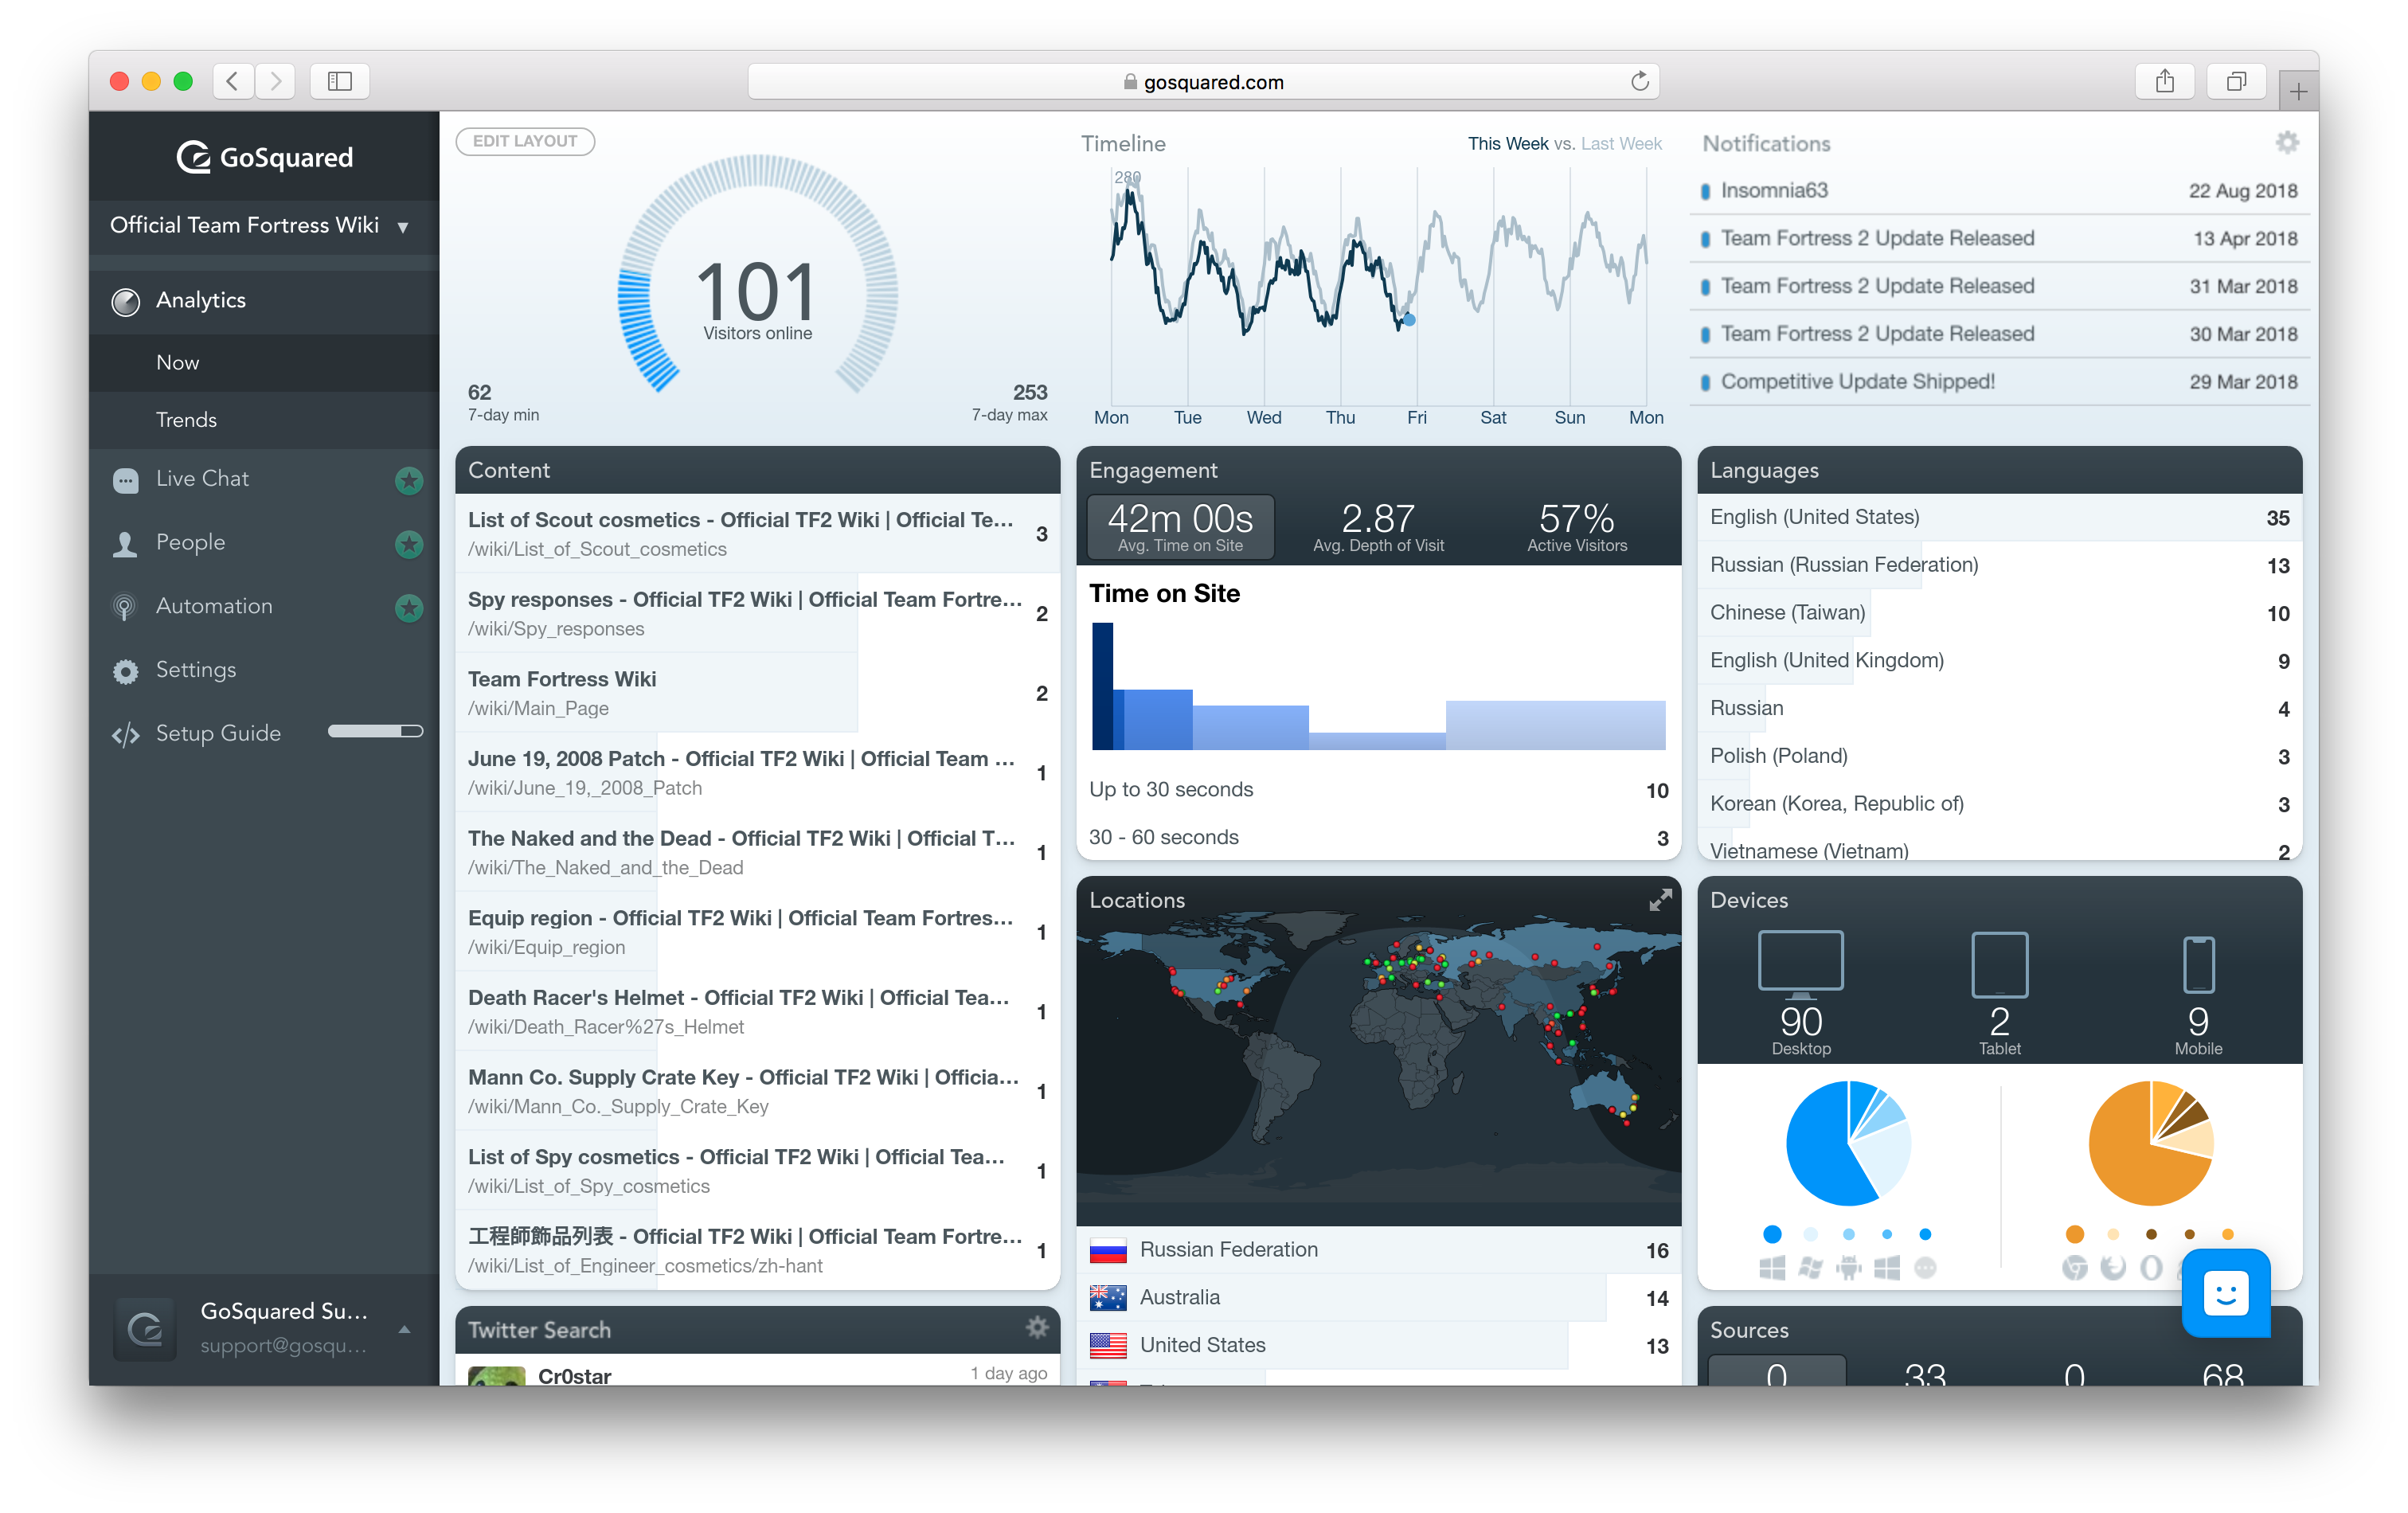 Now real-time dashboard view